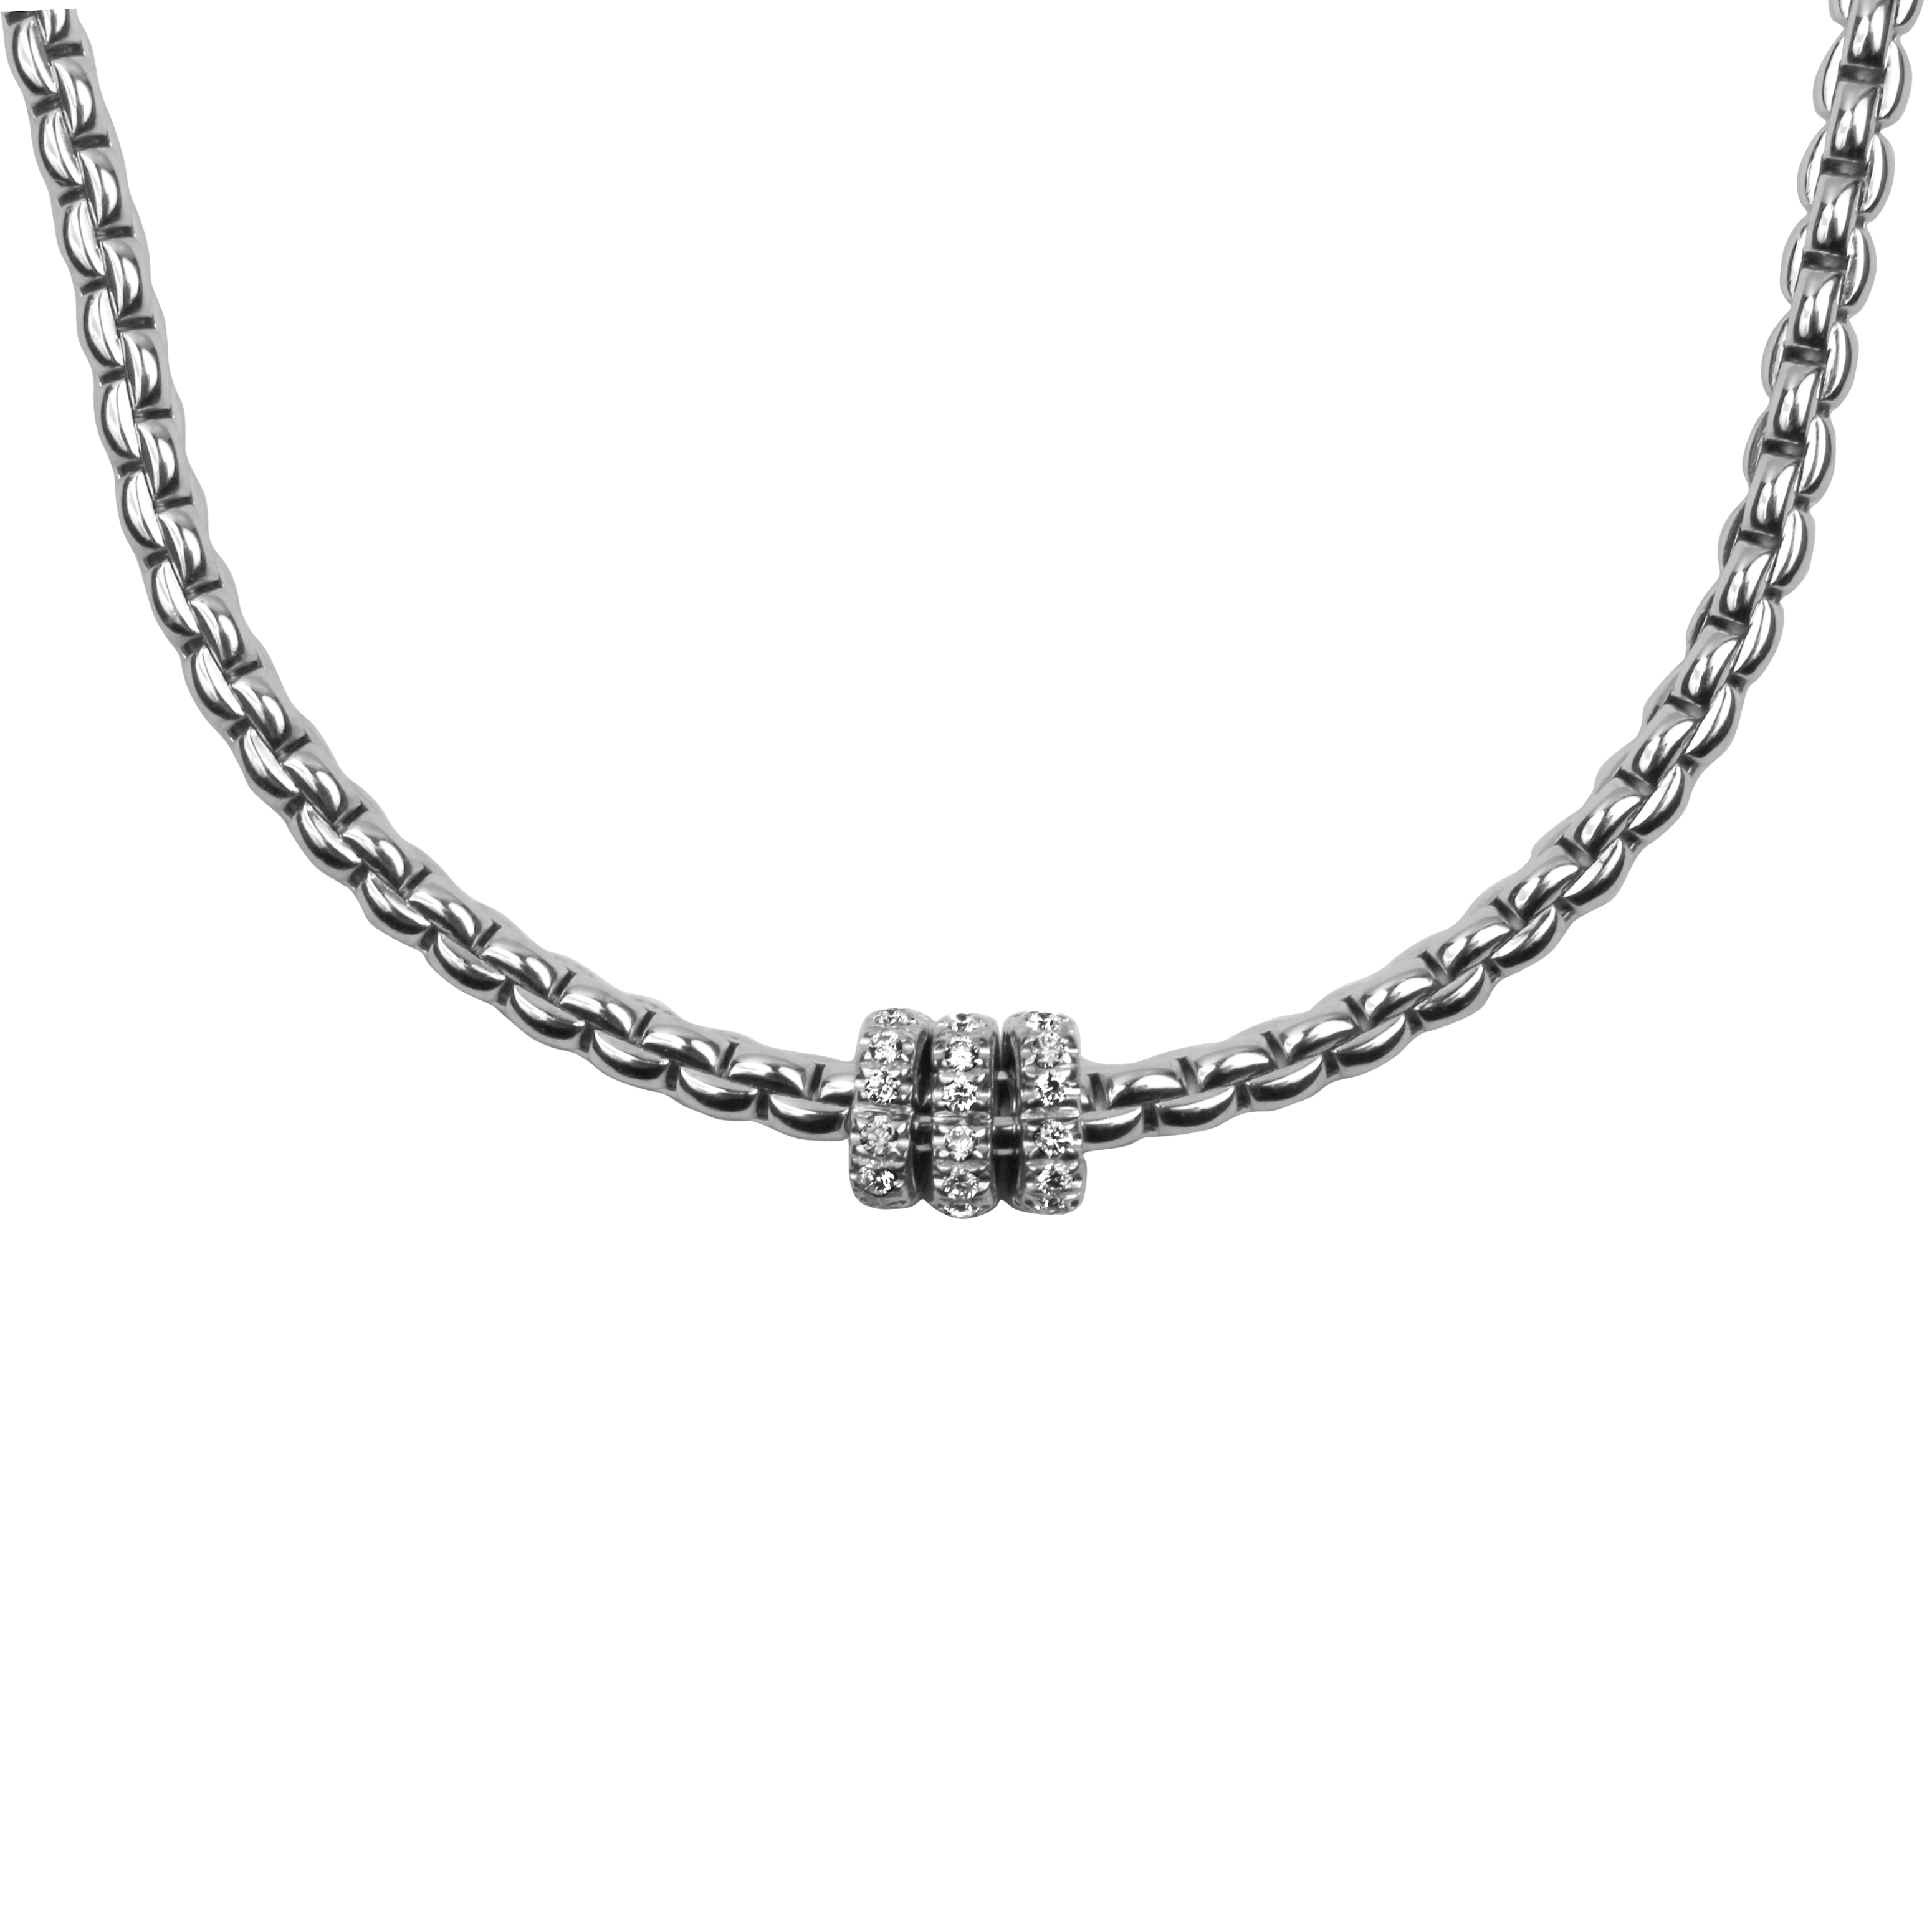 Fope Necklaces and Pendants Fope Eka Collection 18K White Gold Diamond Necklace with Diamond Rondells